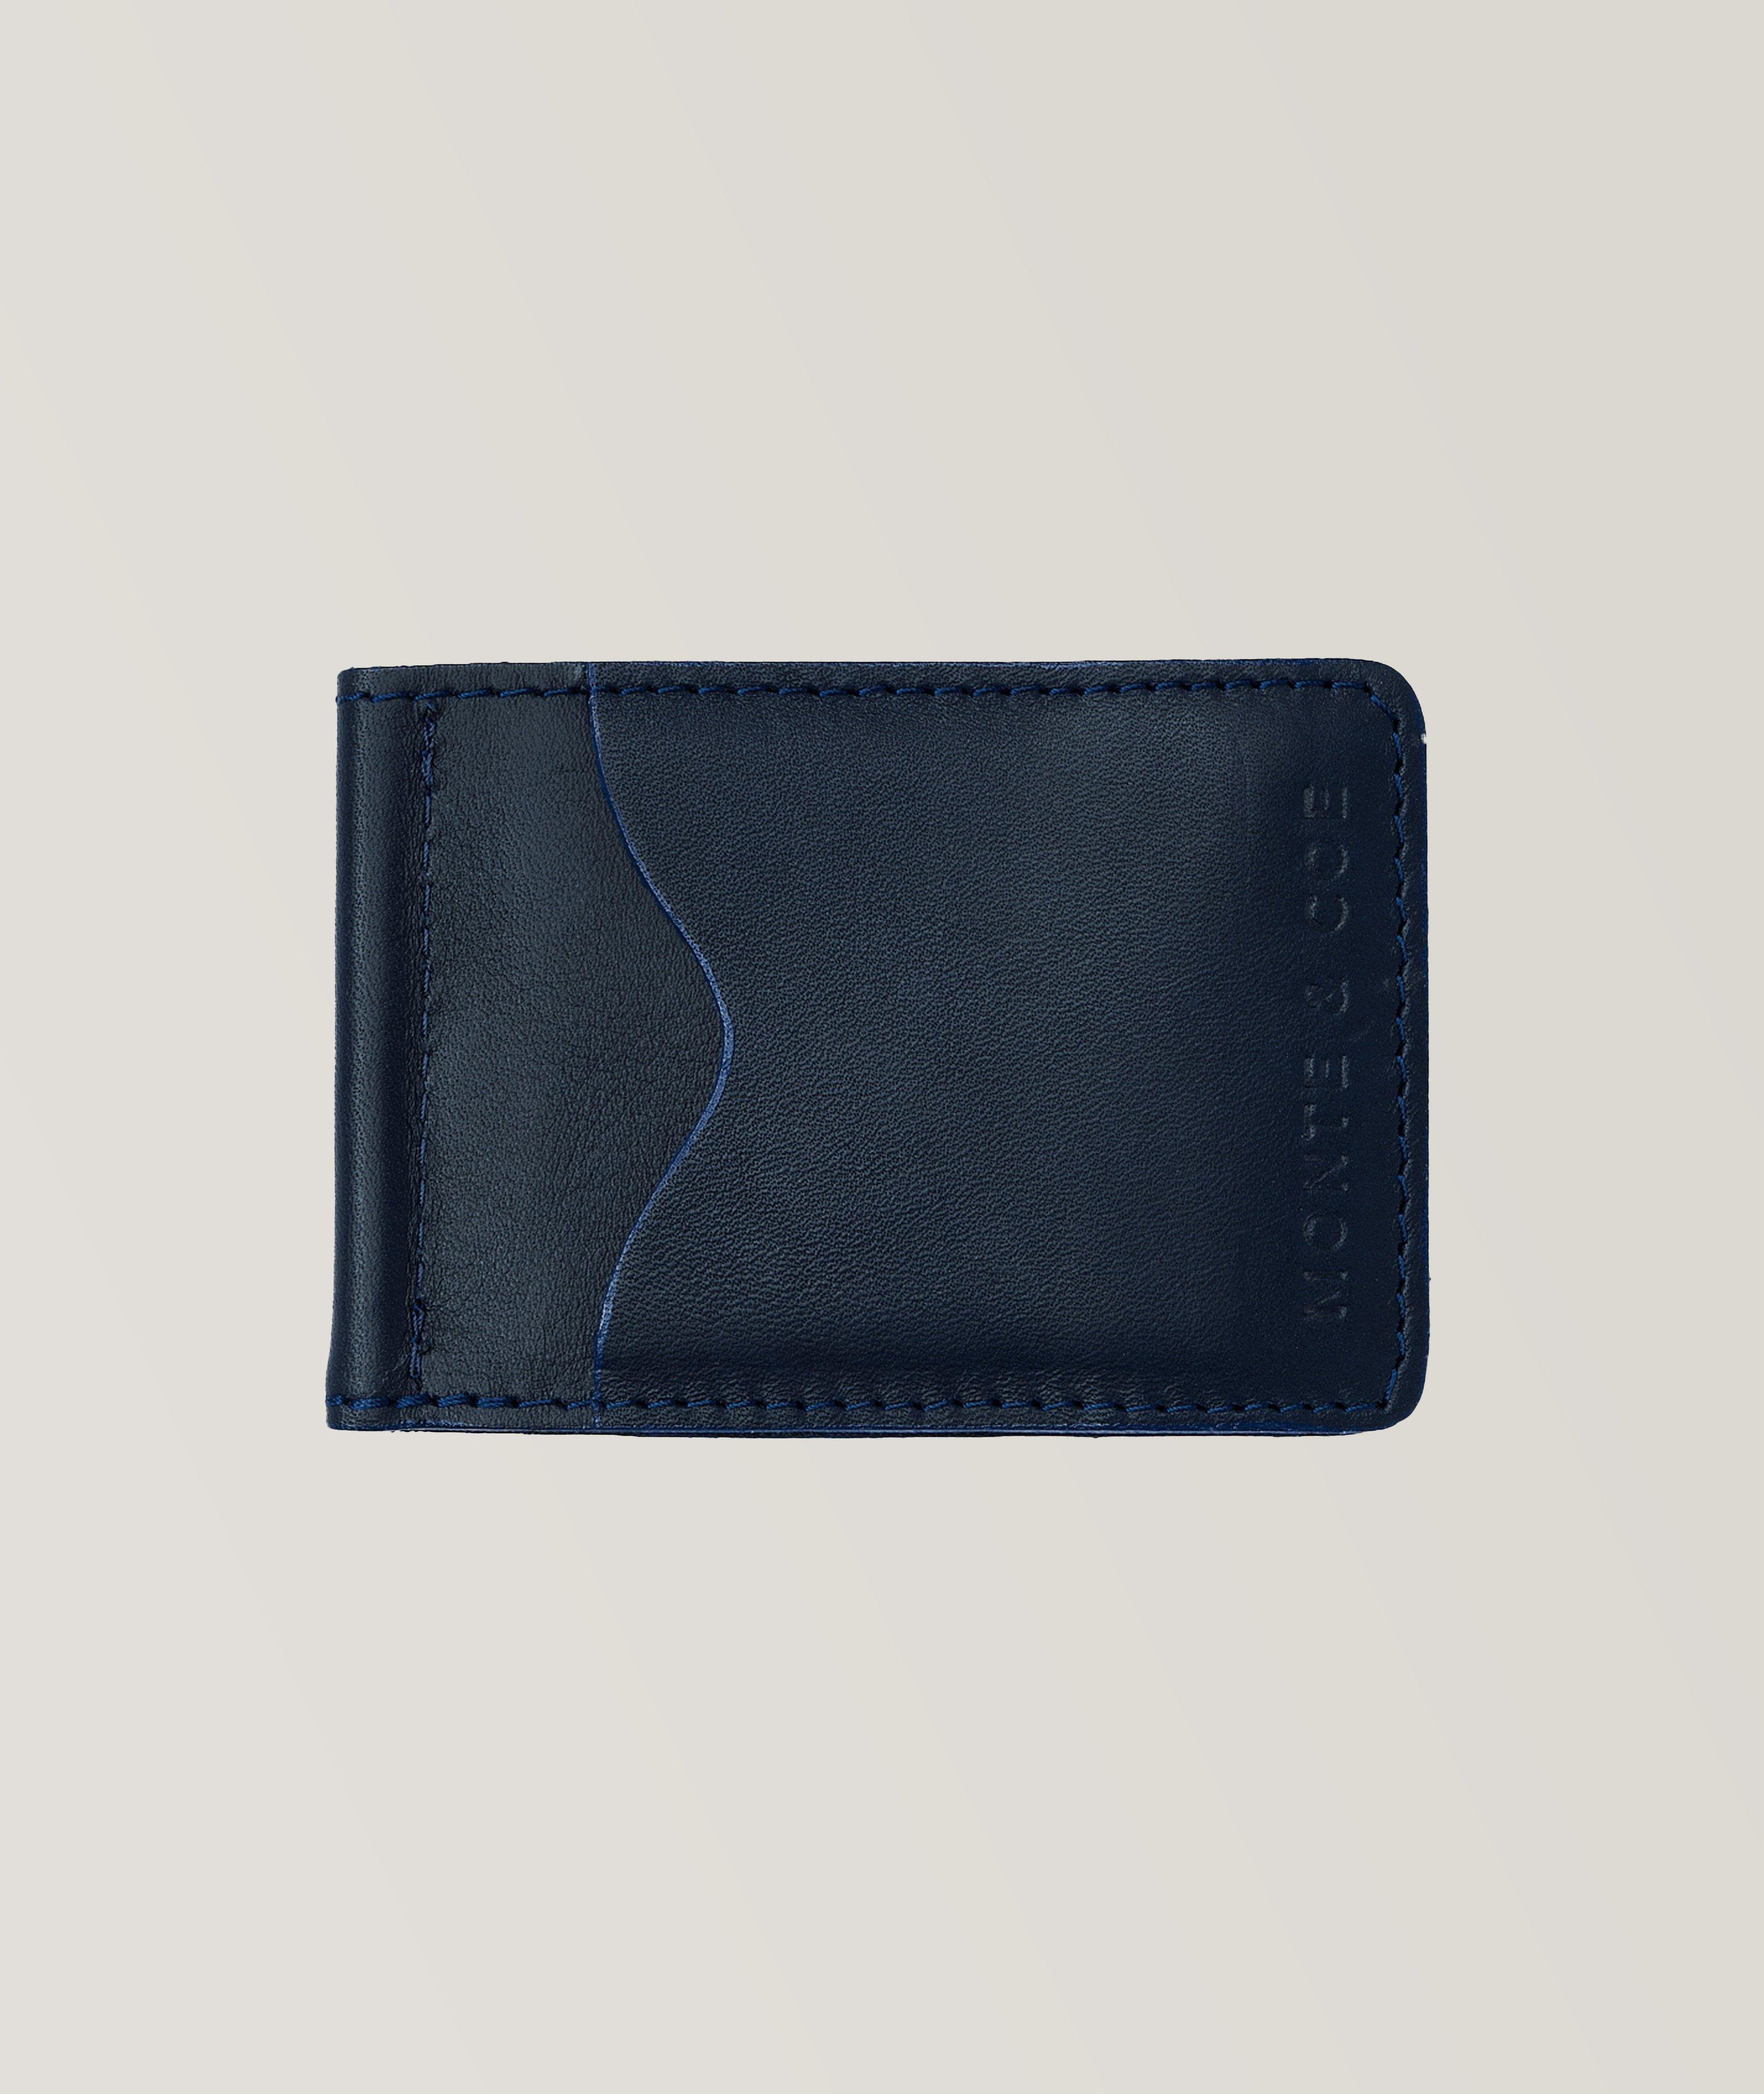 Monte & Coe Slim Leather Wallet With Money Clip, Wallets